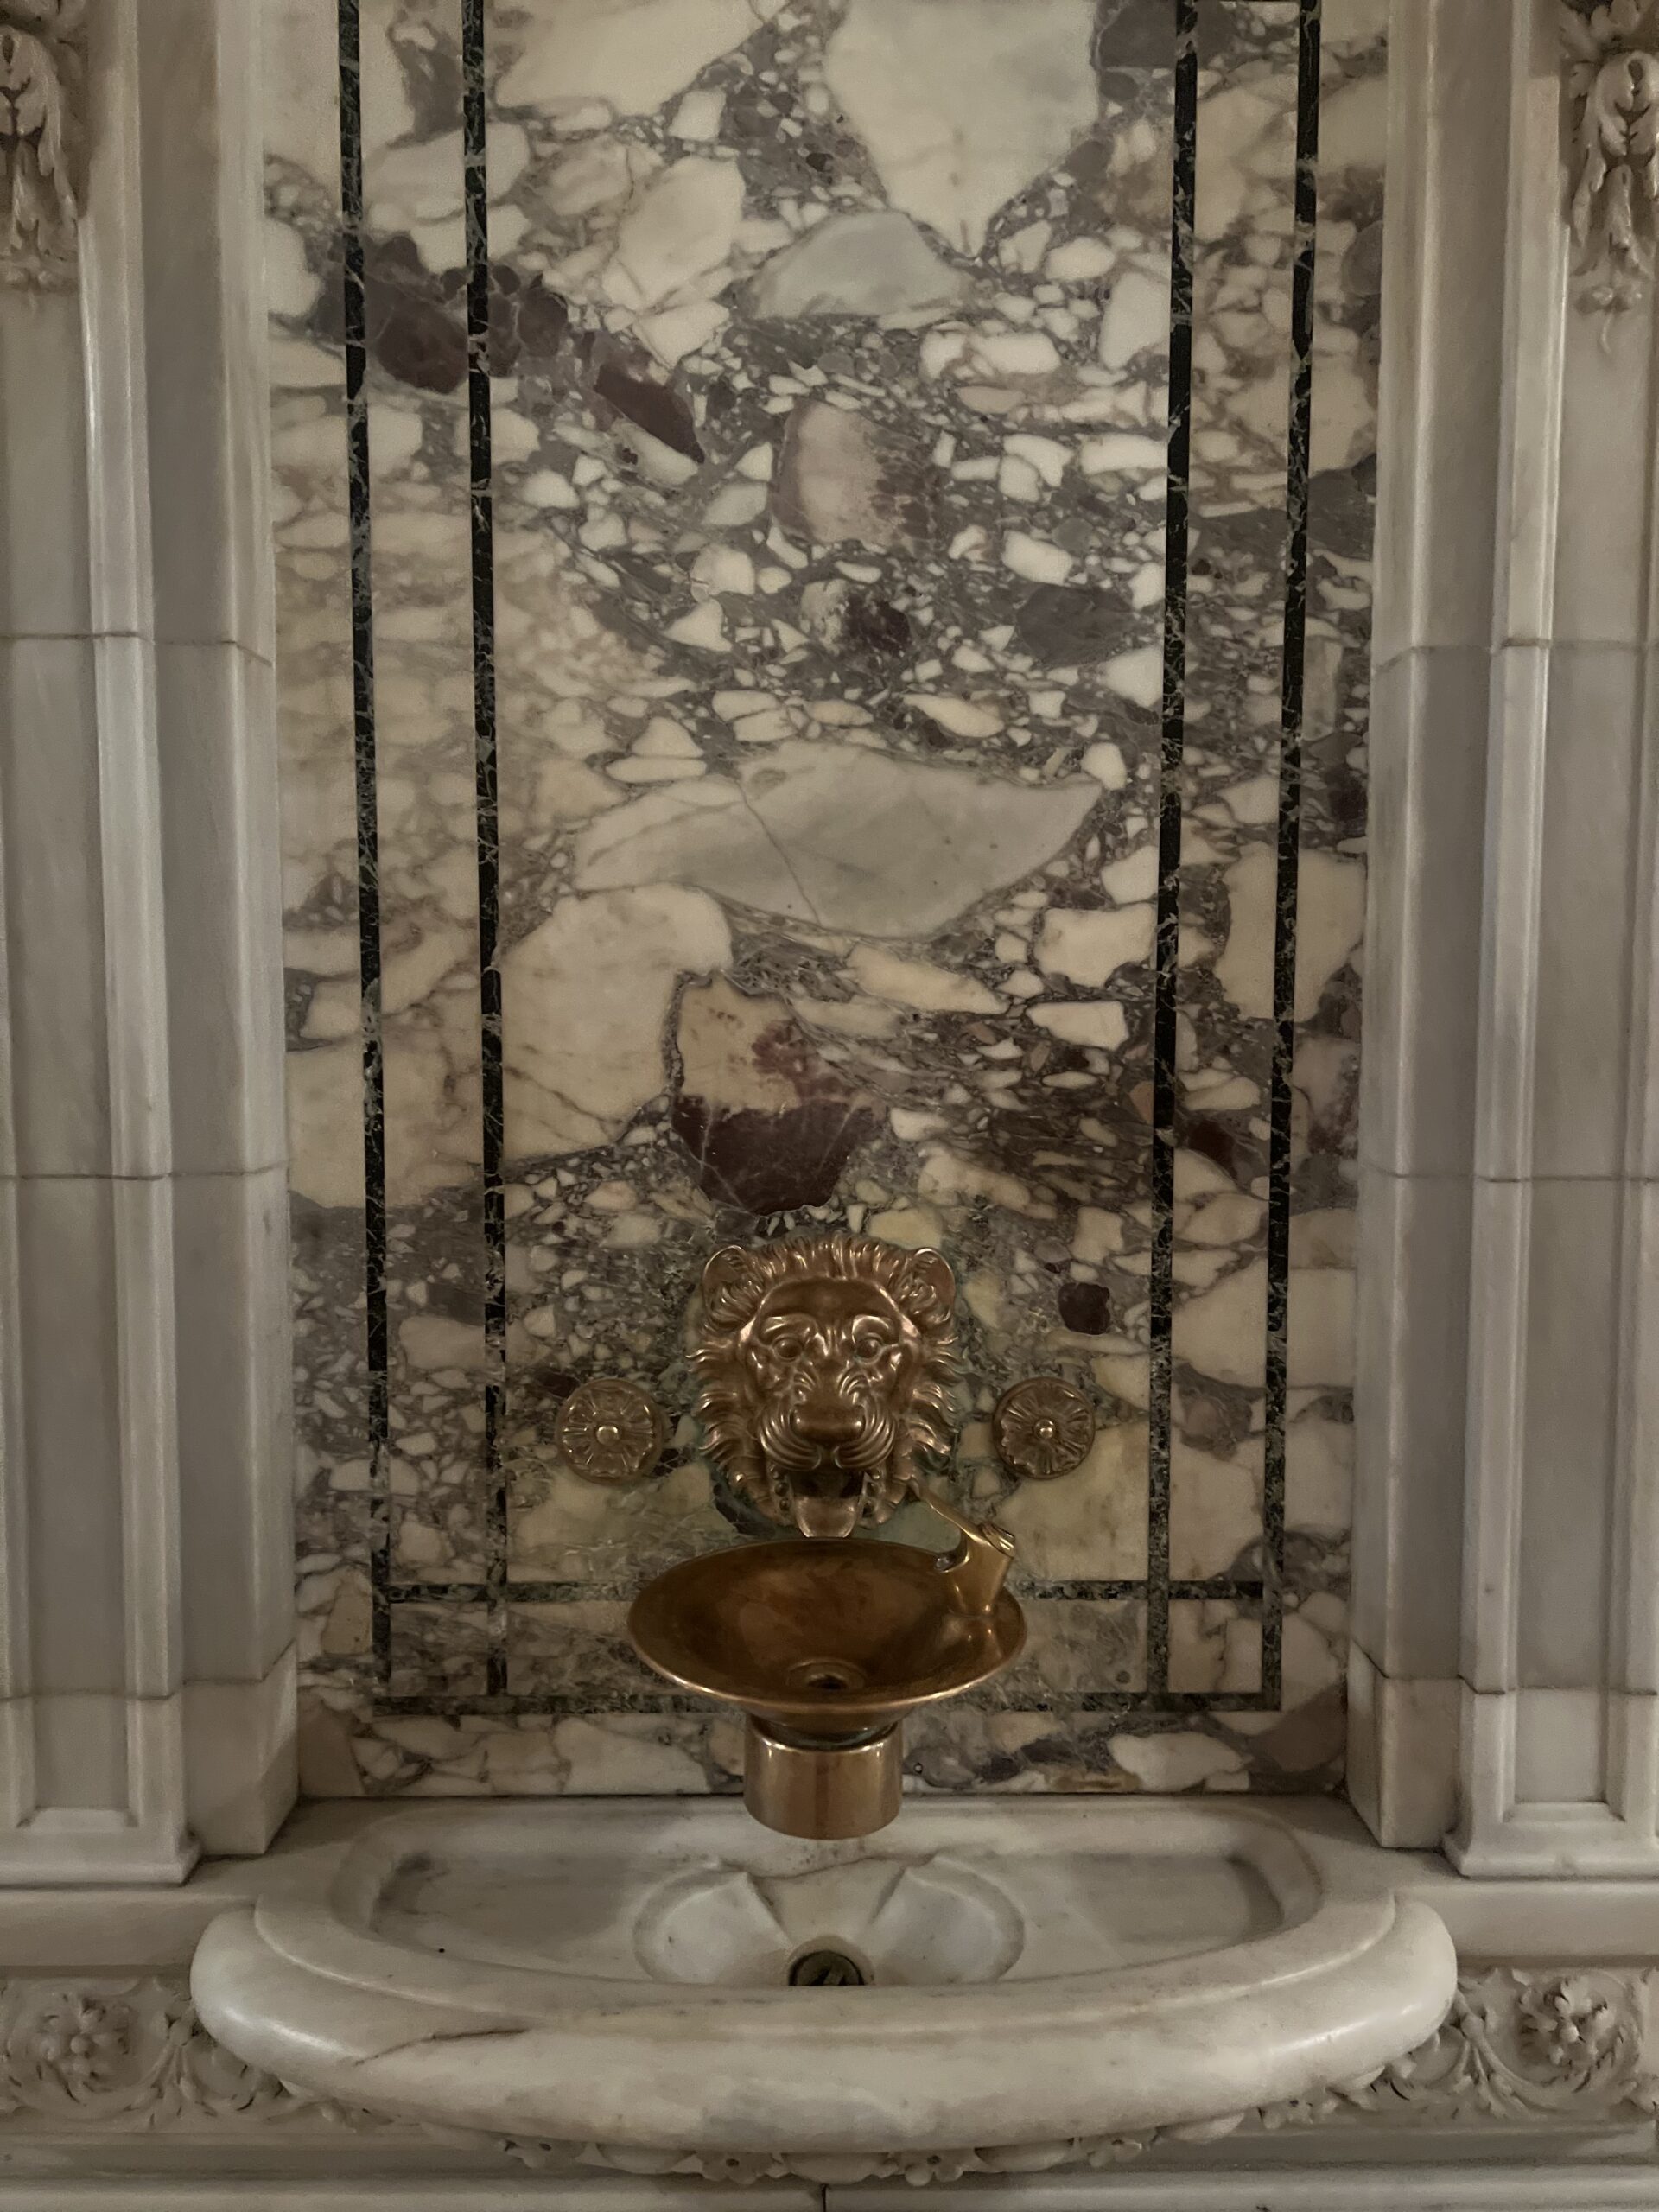 Marble ornate Water Fountain inside the New York Public Library Main Branch